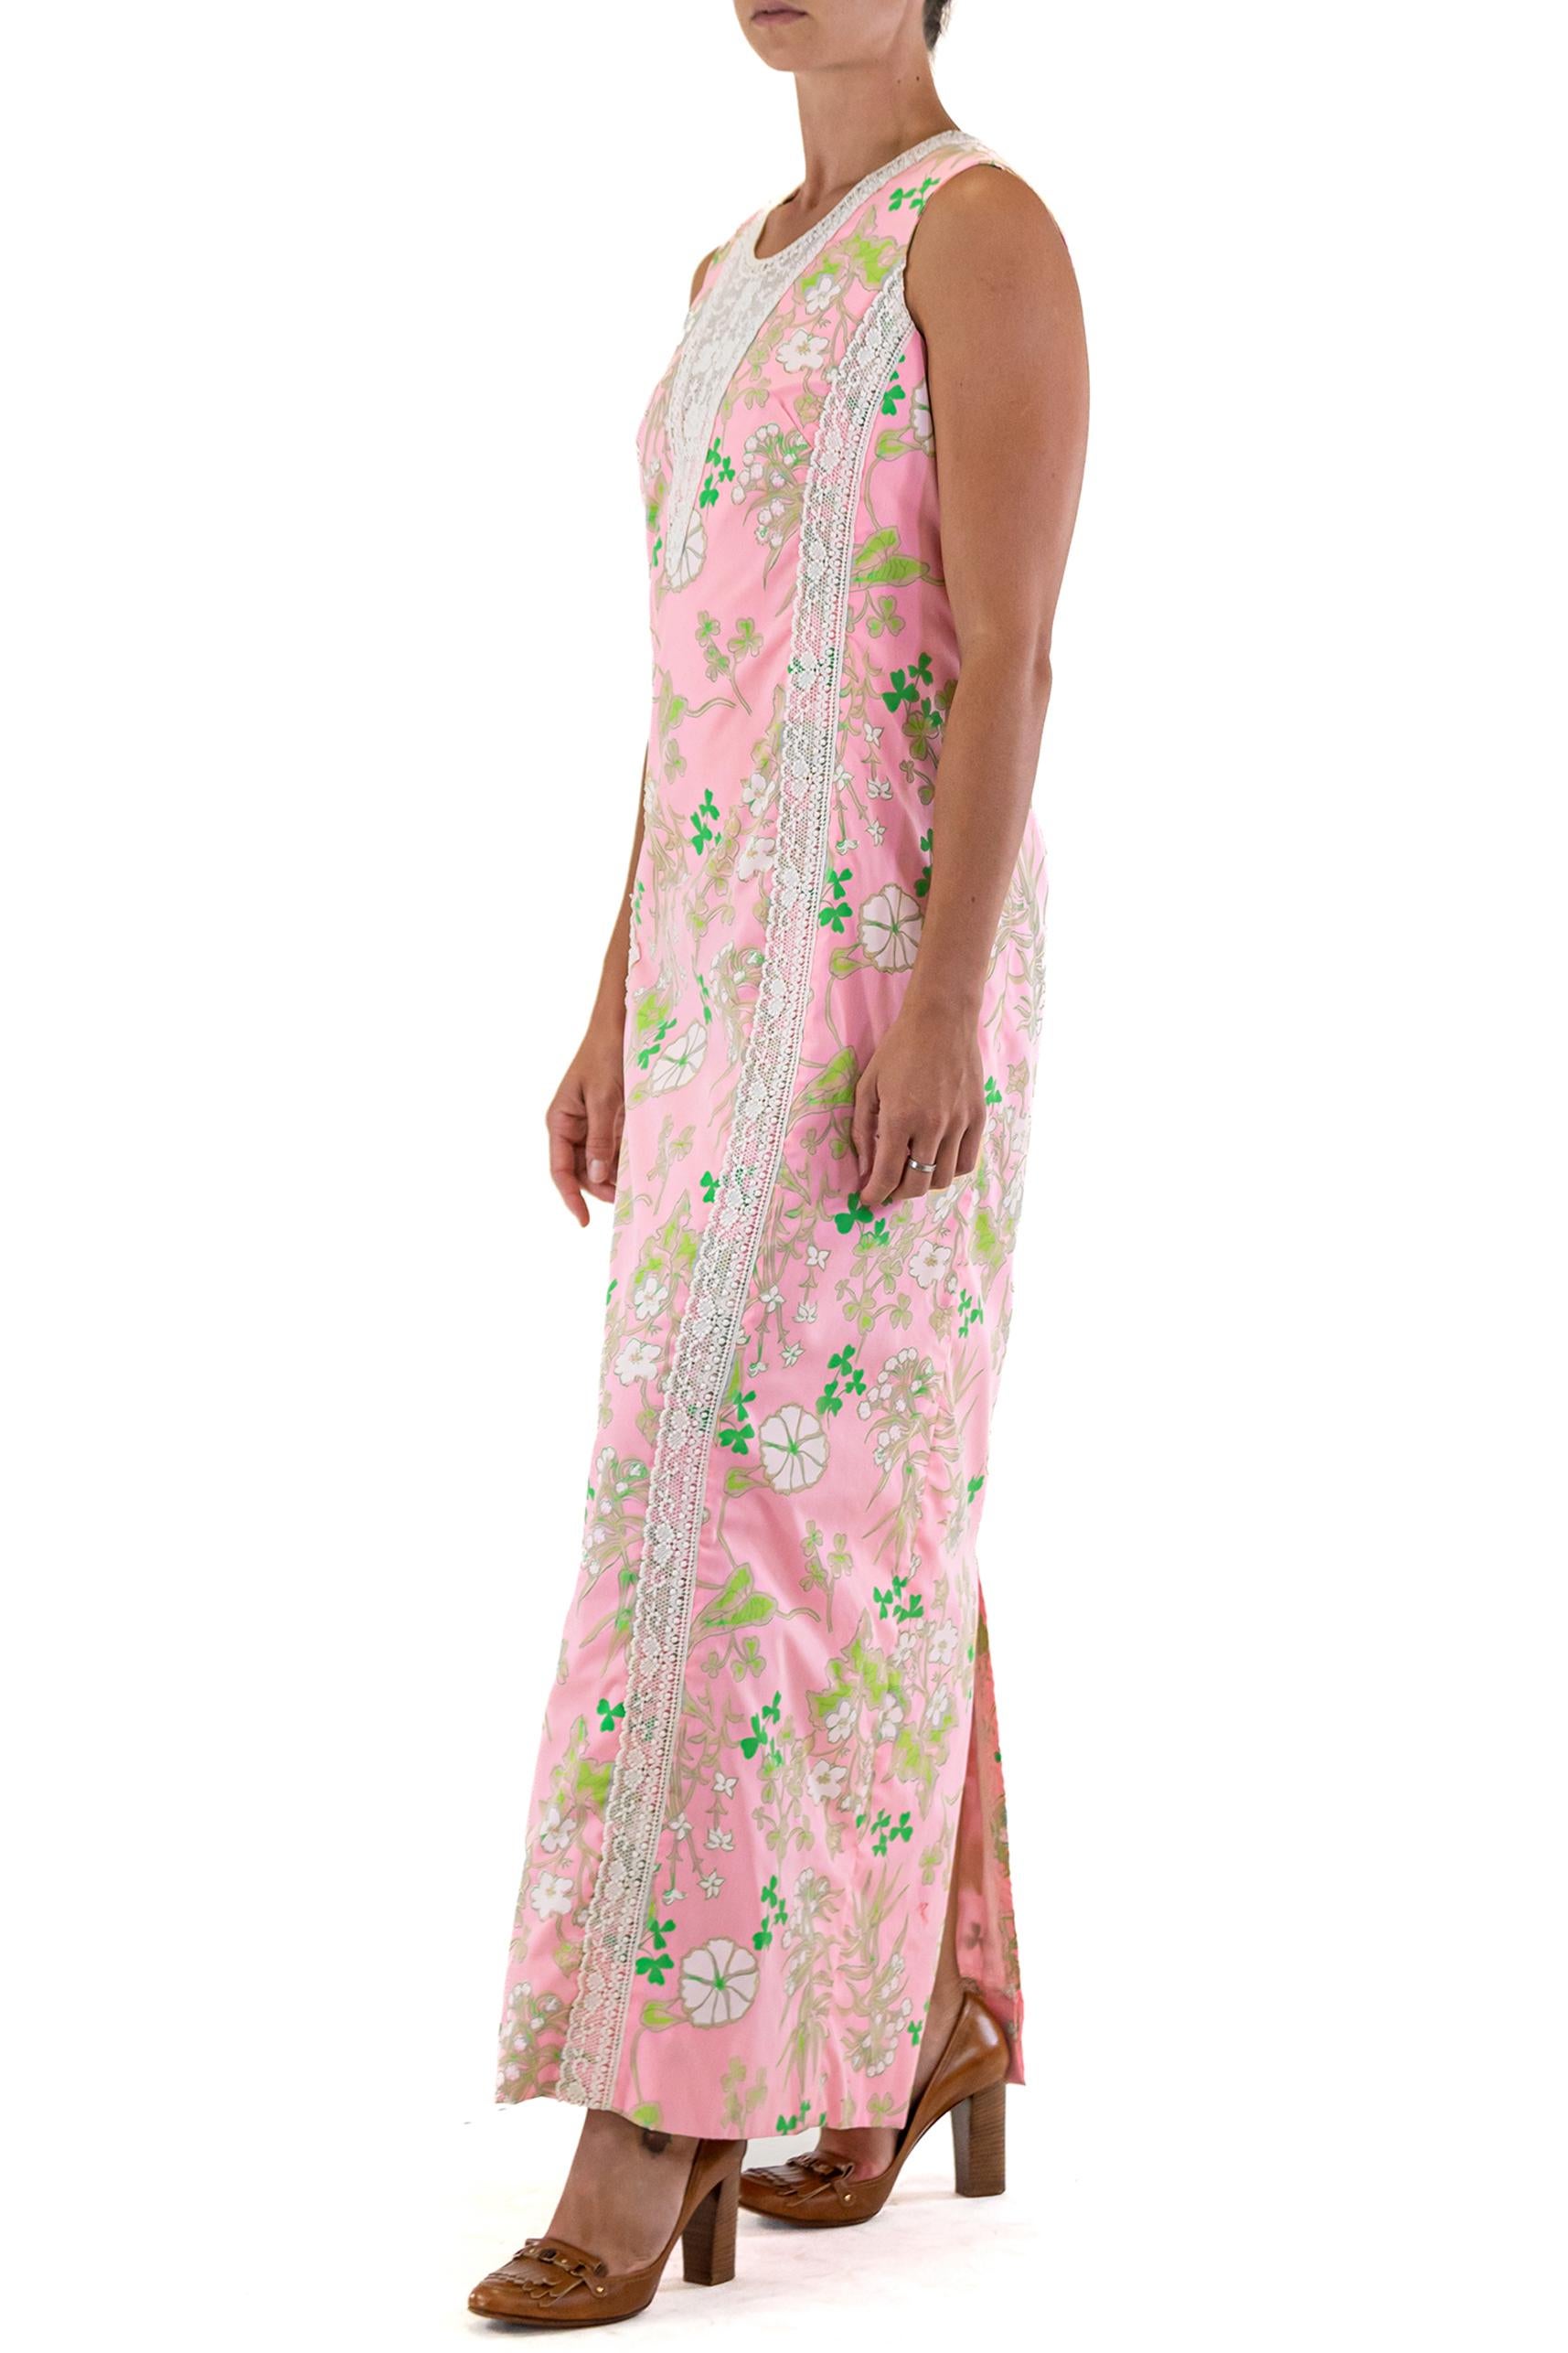 lilly pulitzer pink lace dress